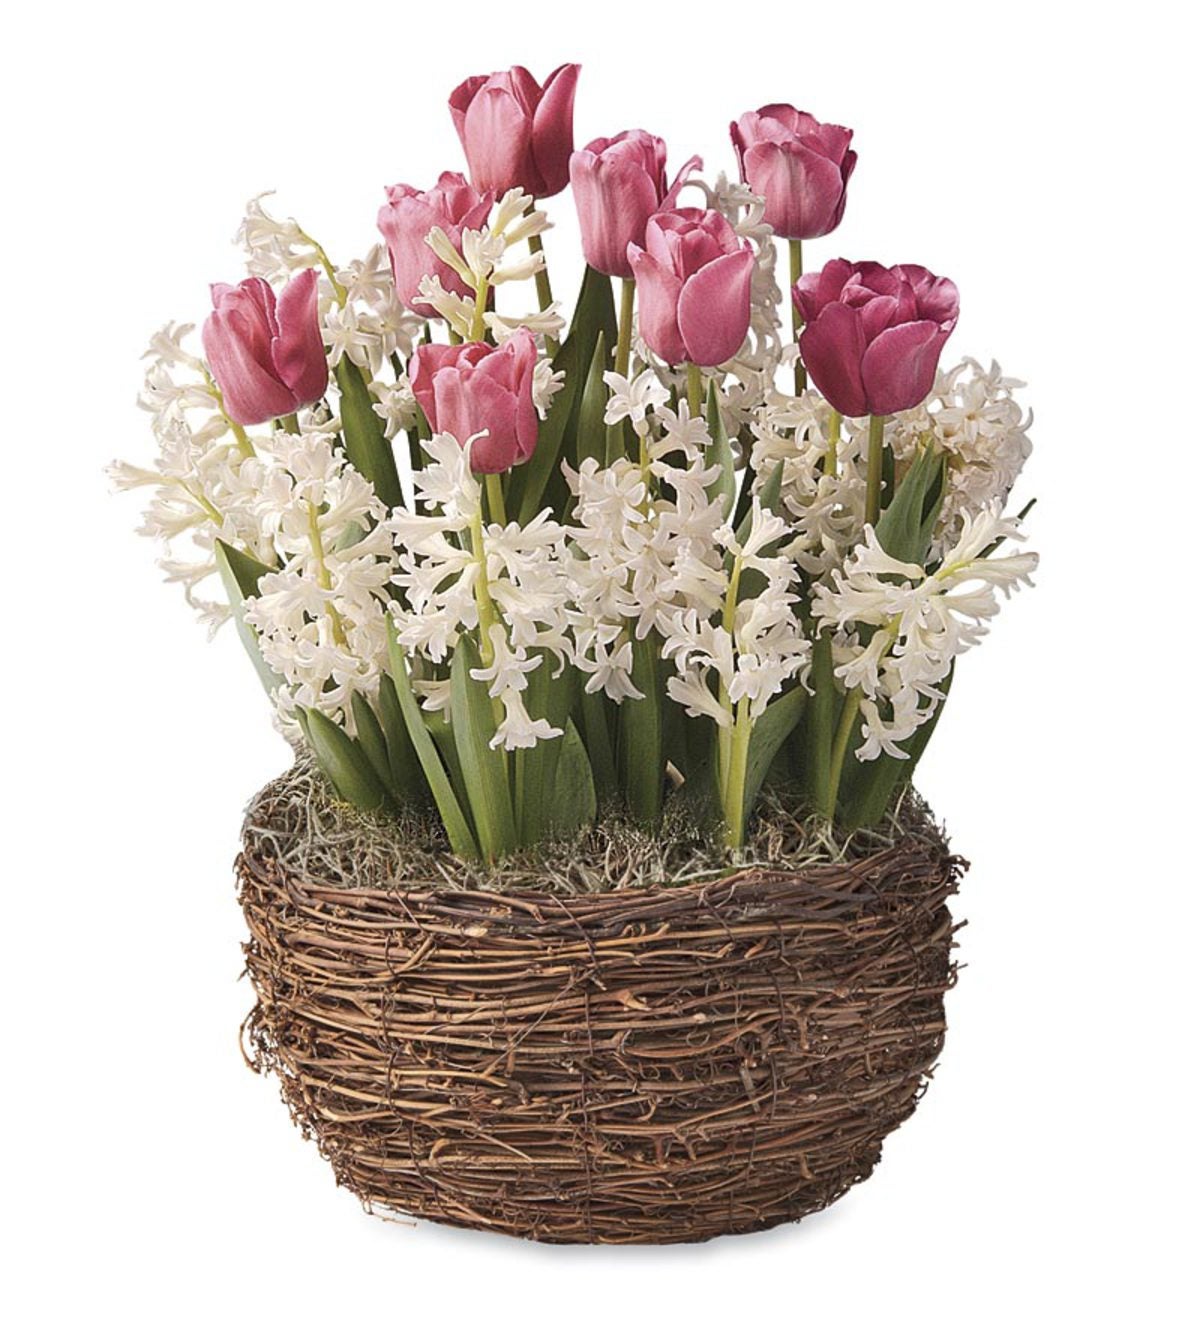 Pink Tulips And White Hyacinths In Vine Basket